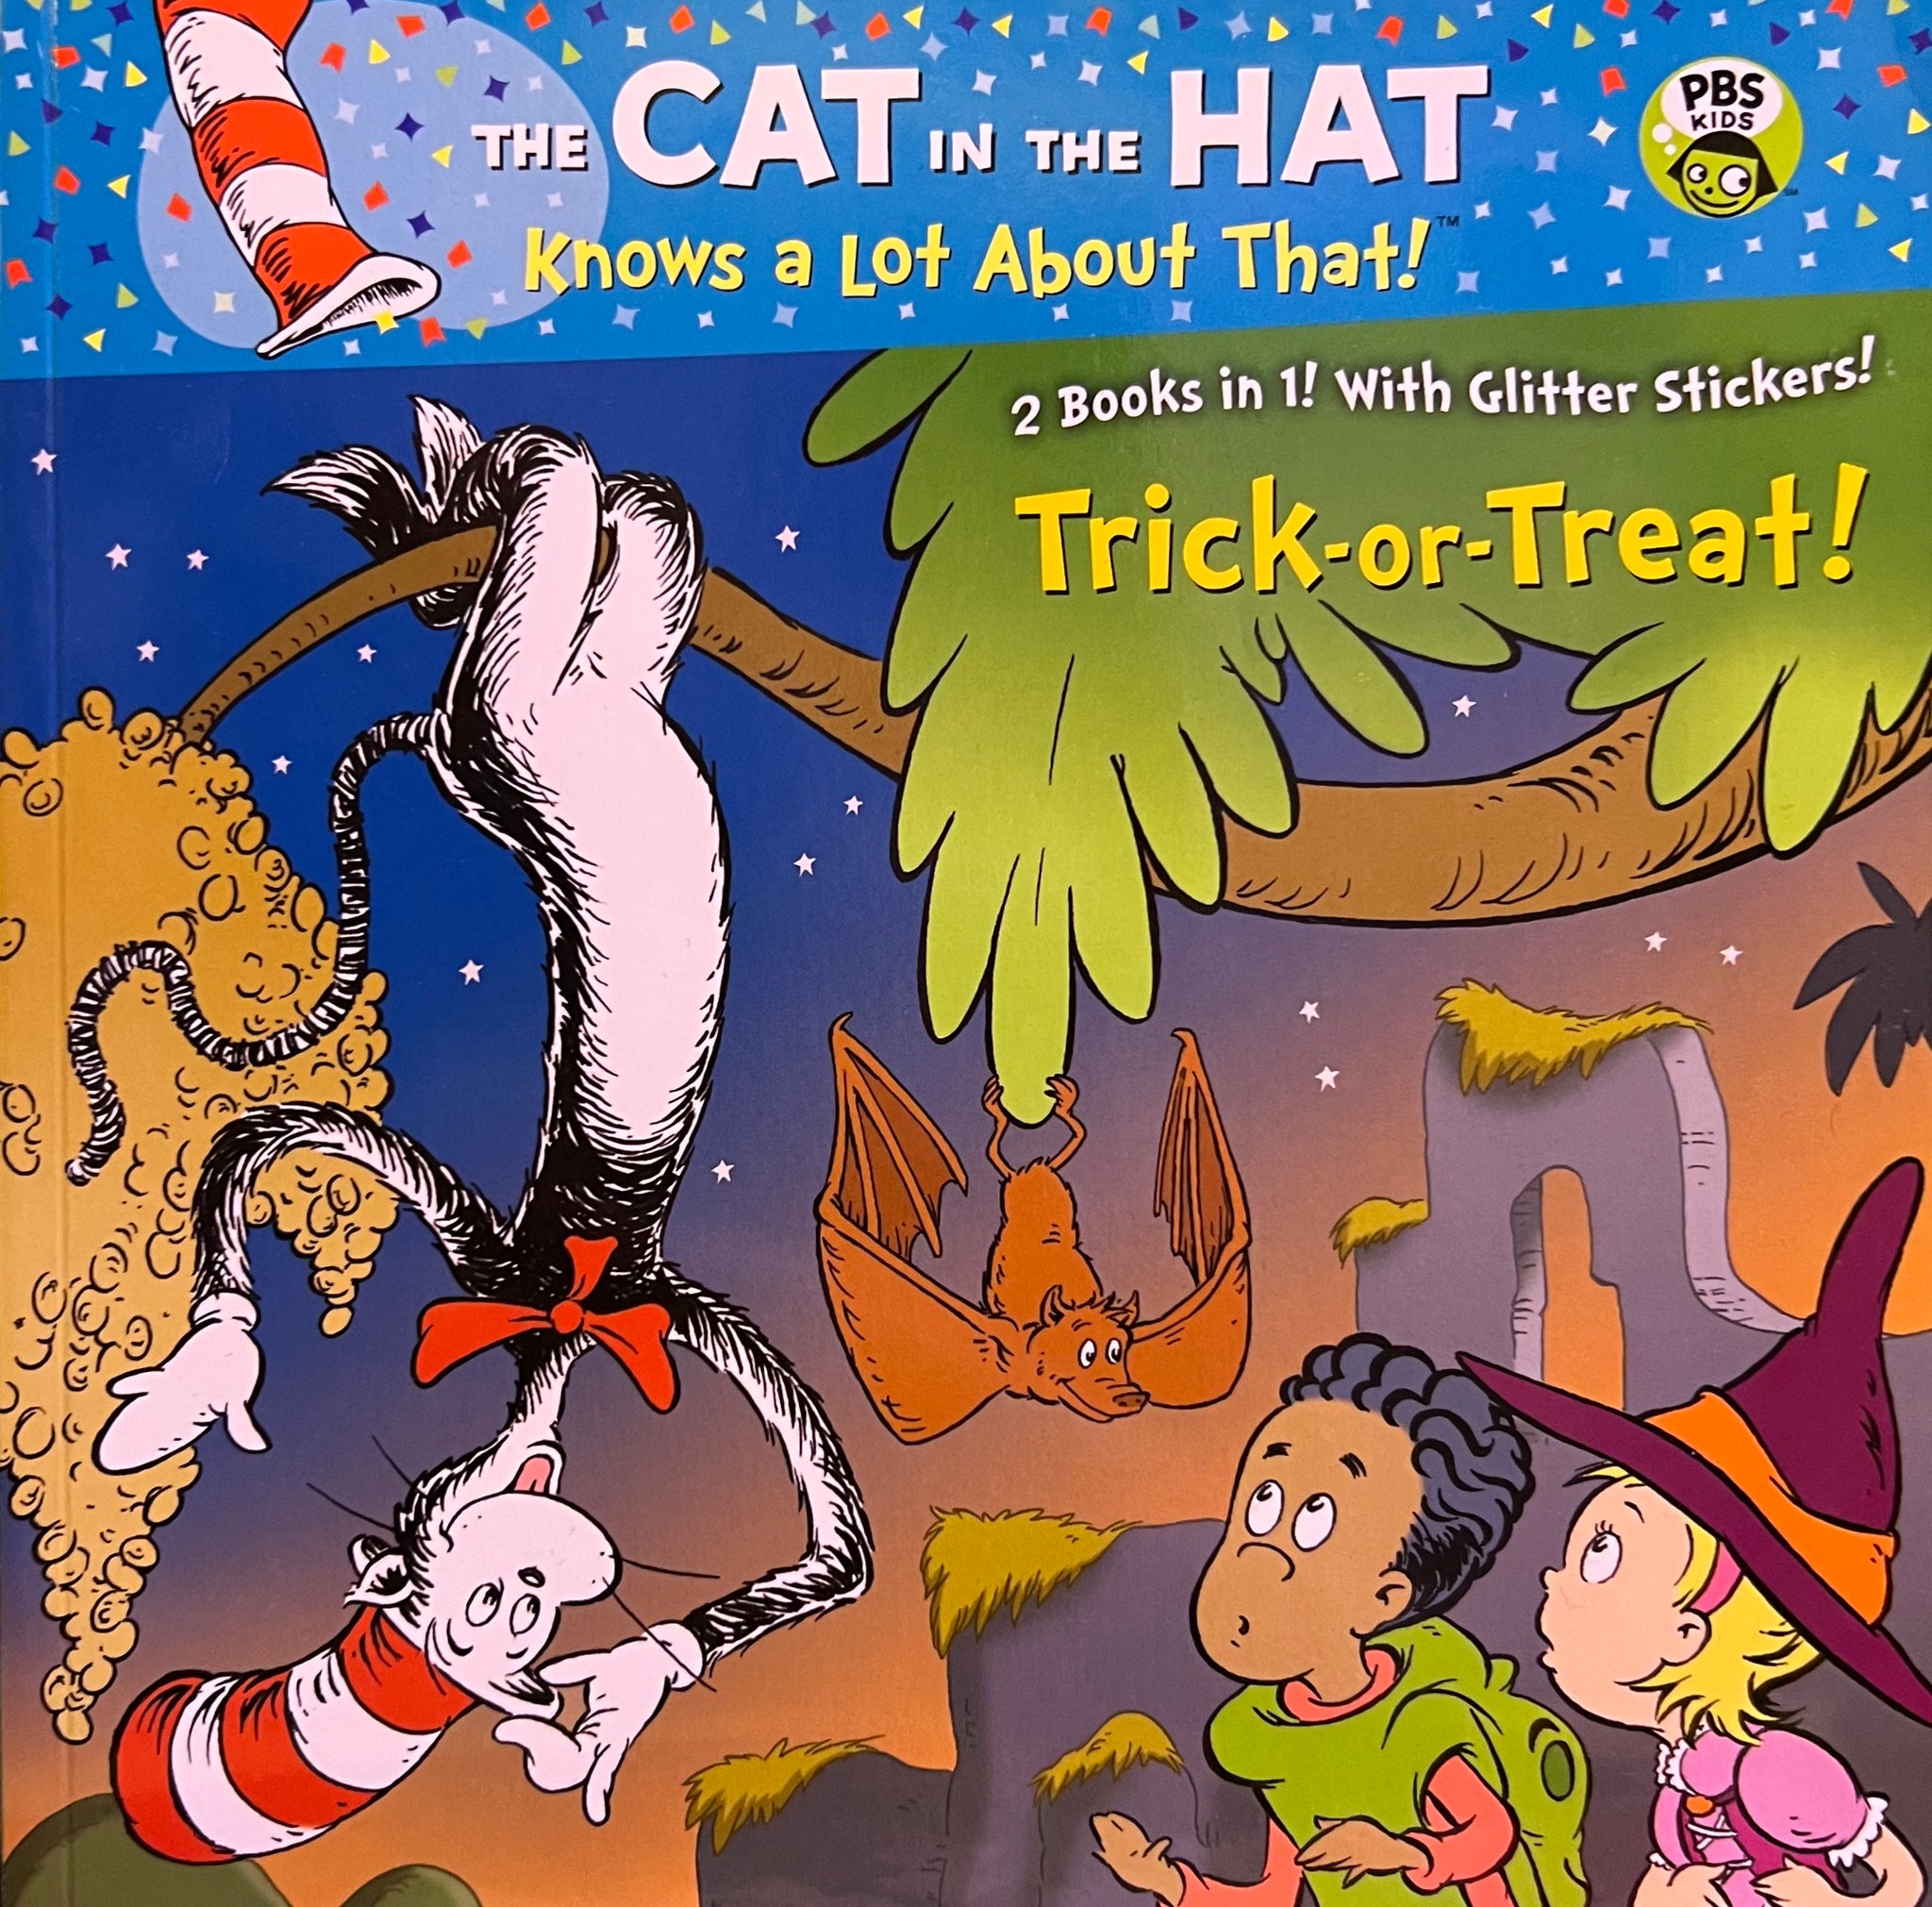 The Cat in the Hat Knows a Lot About That!, Trick-or-Treat and Aye-Aye! (2 Books in 1! With Glitter Stickers!)